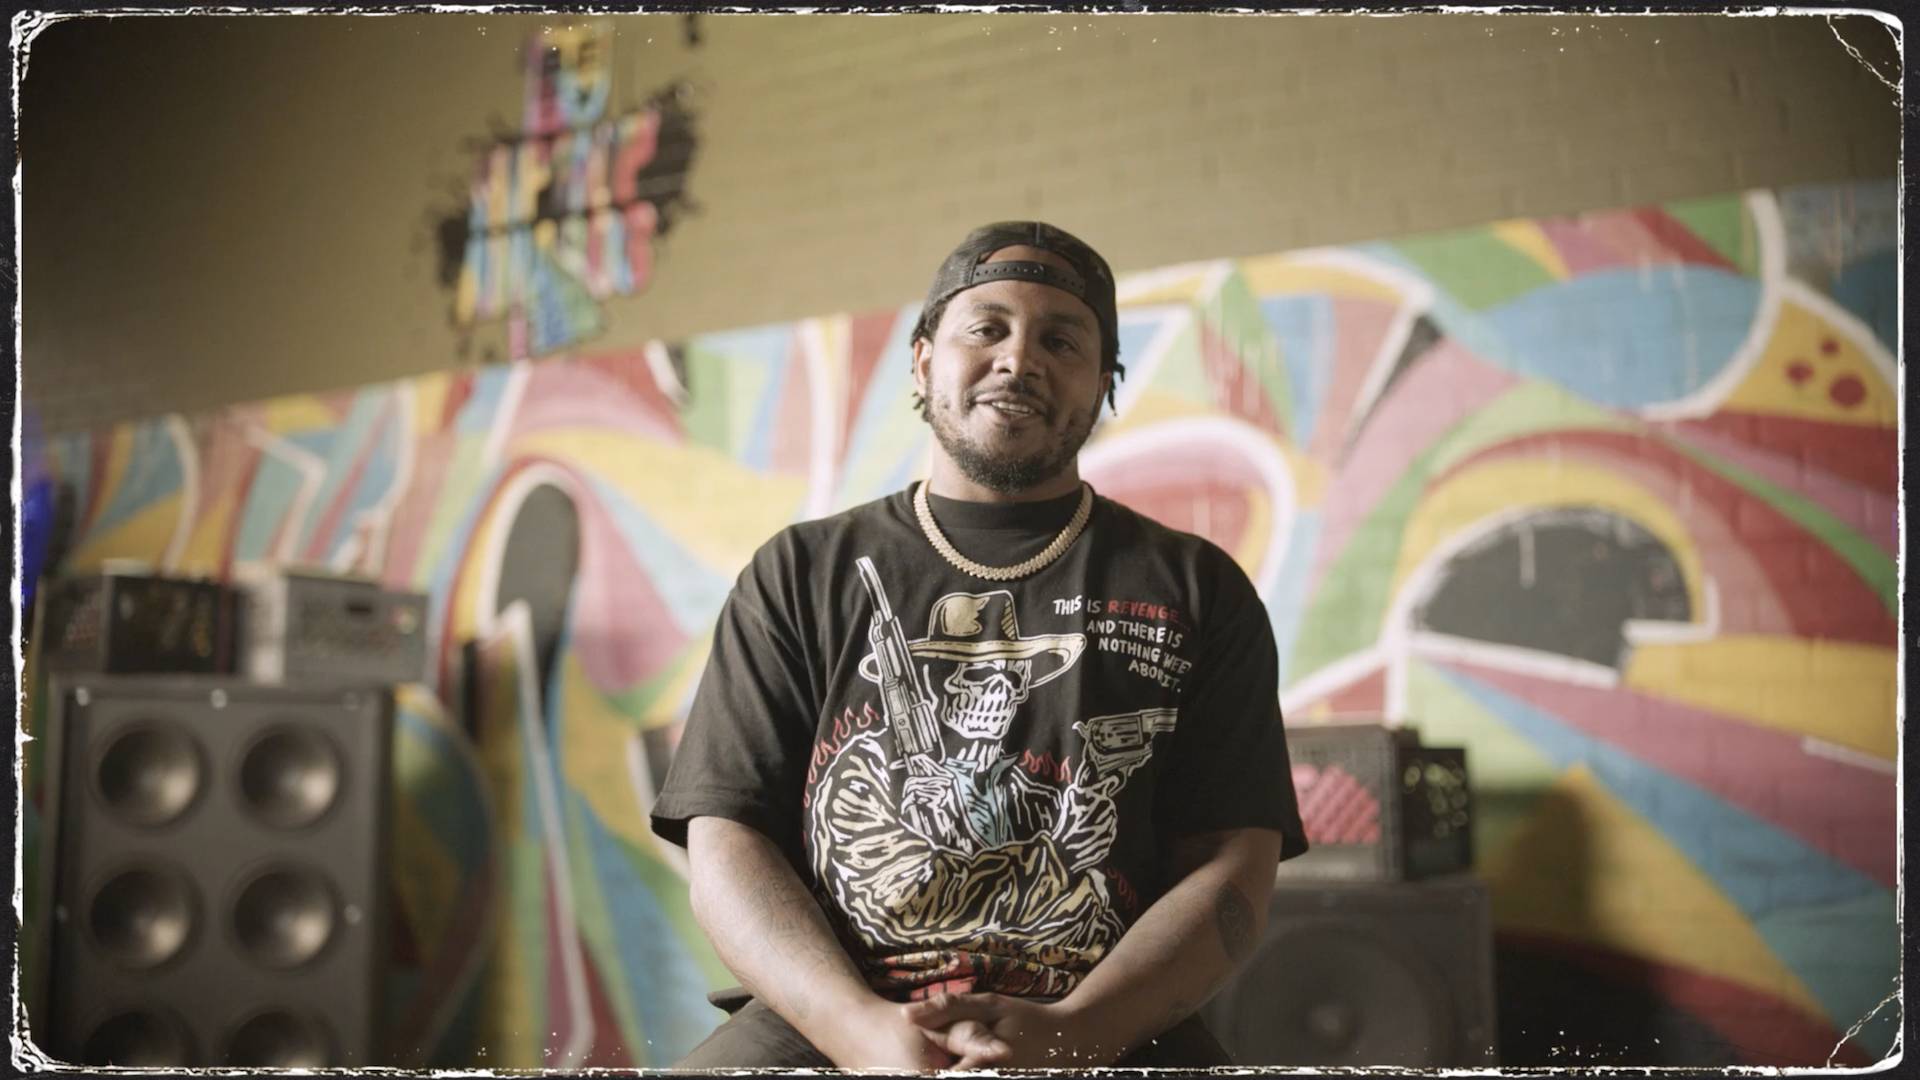 Rapper GRIP in a black shirt and hat, standing in front of a colorful wall.